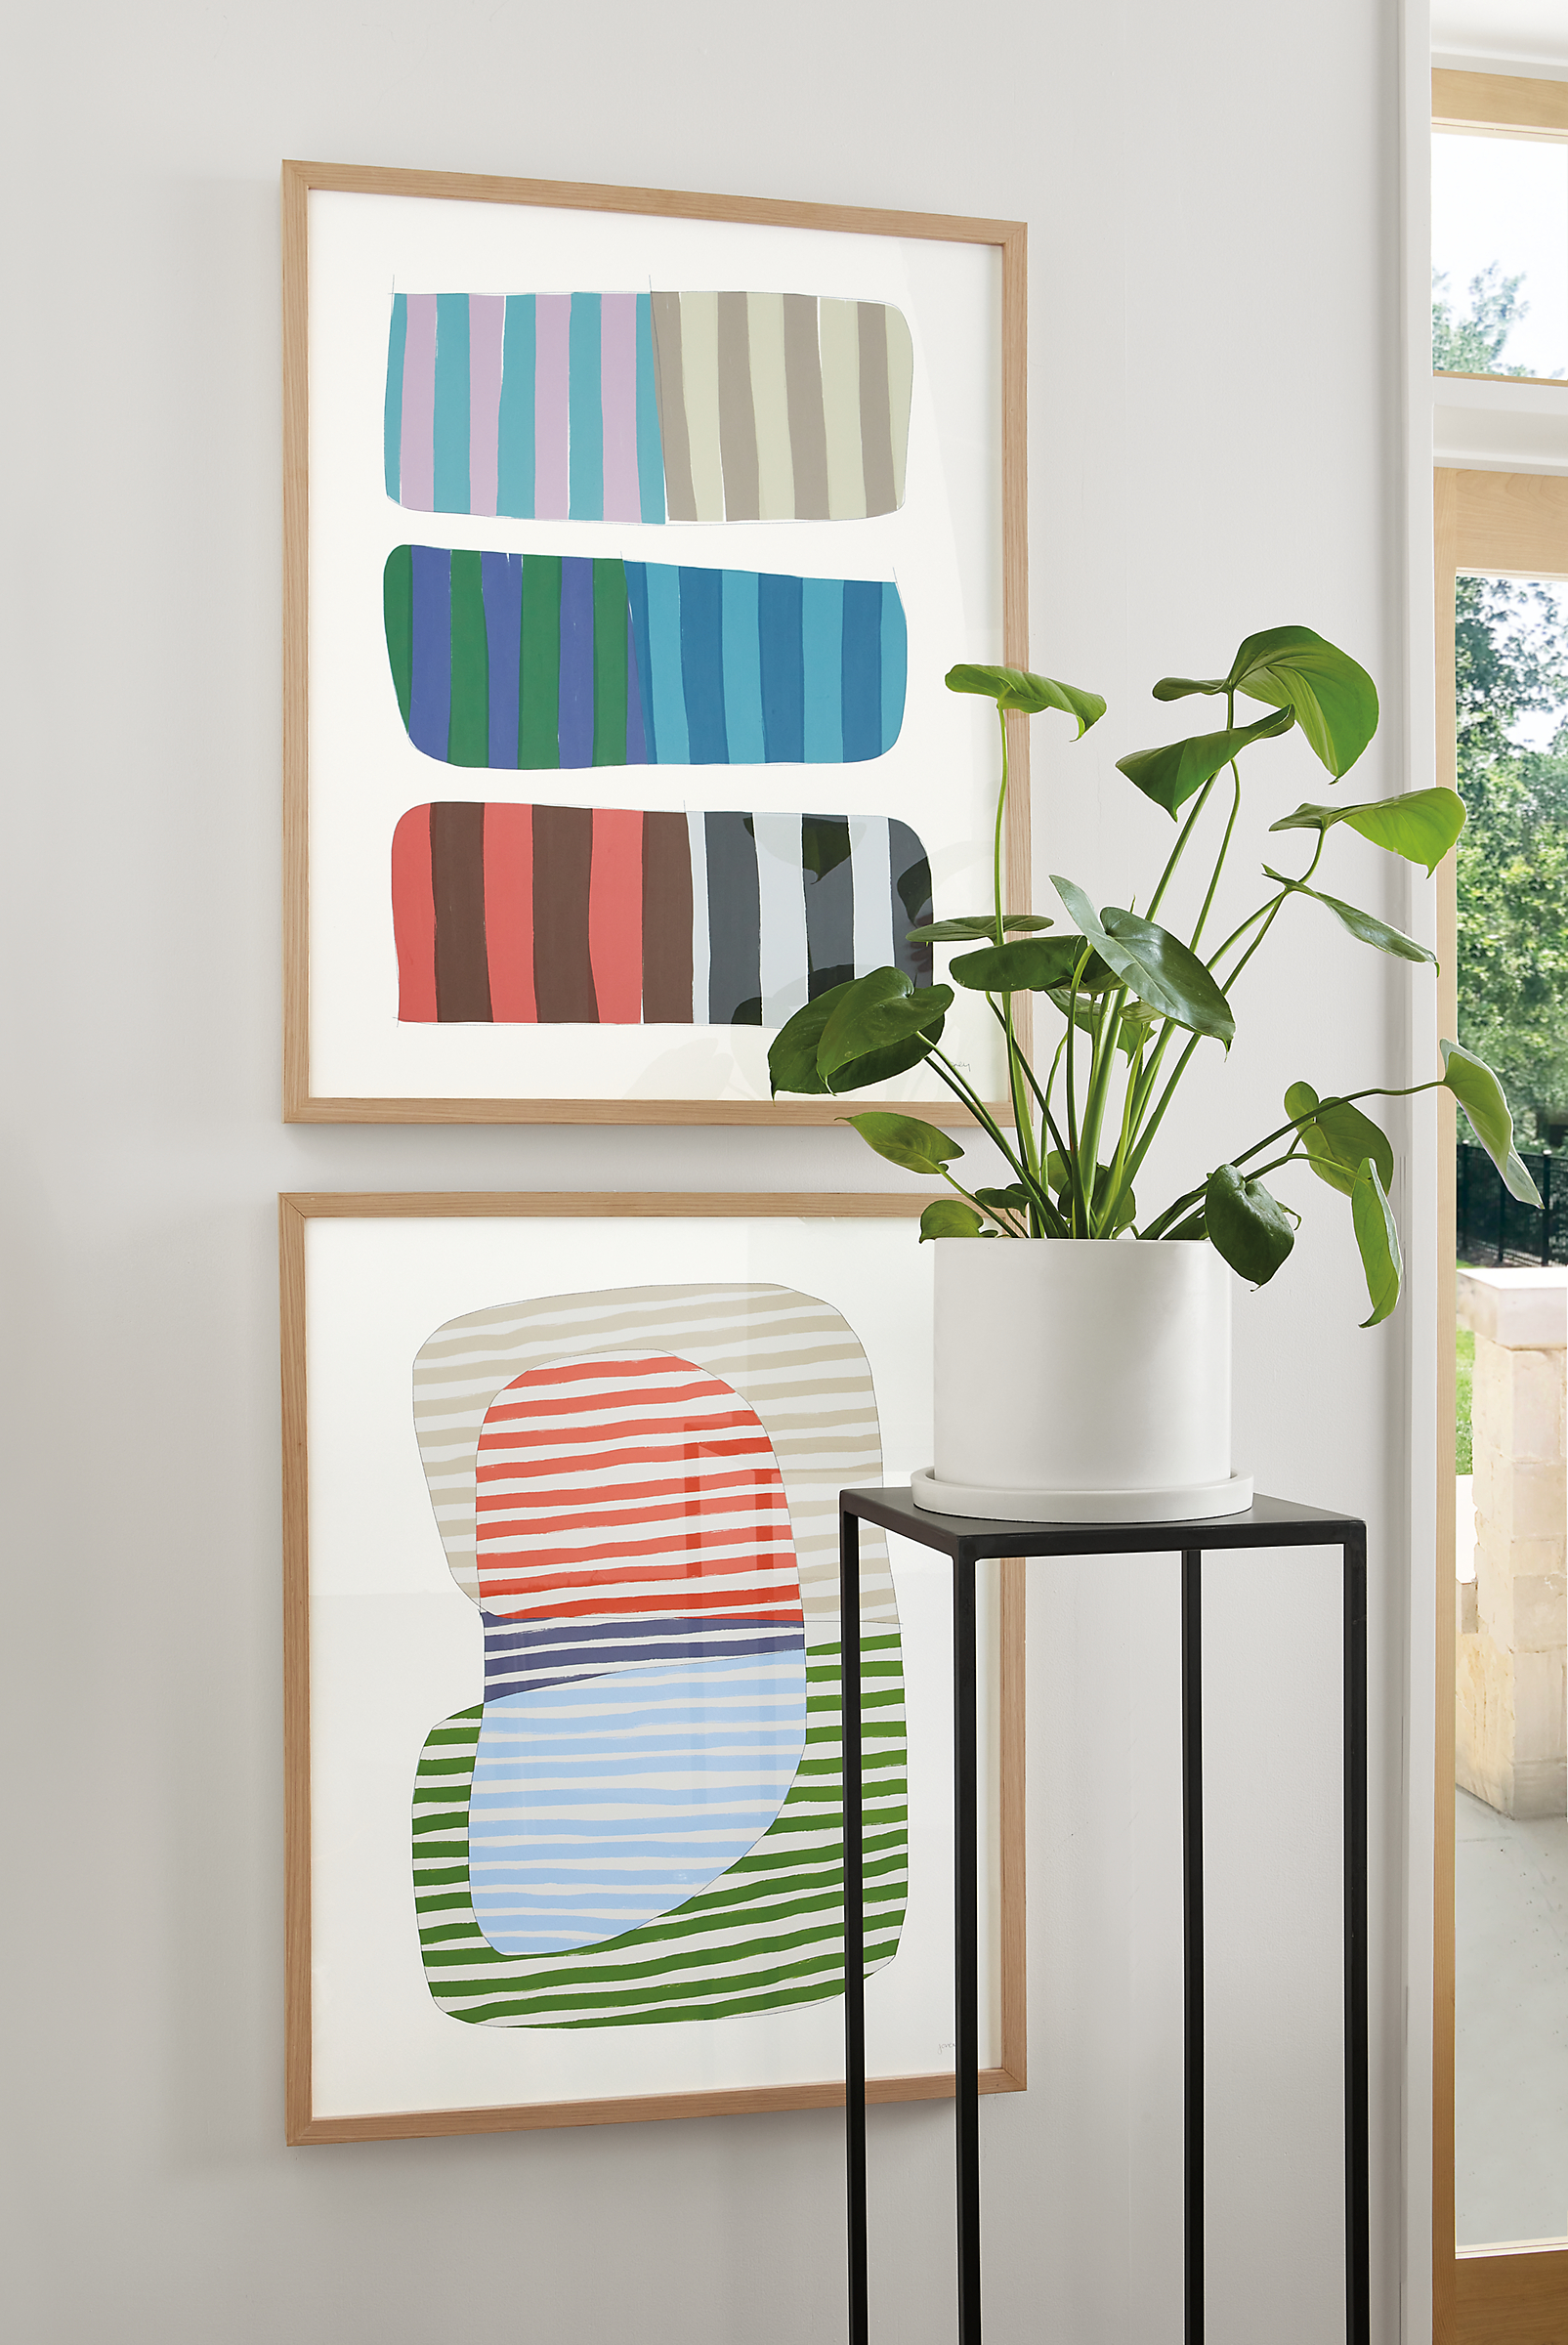 Close-up of Jorey Hurley artwork, Abstrac Stripes 1 and 2 with white oak frame and slim table in natural steel.